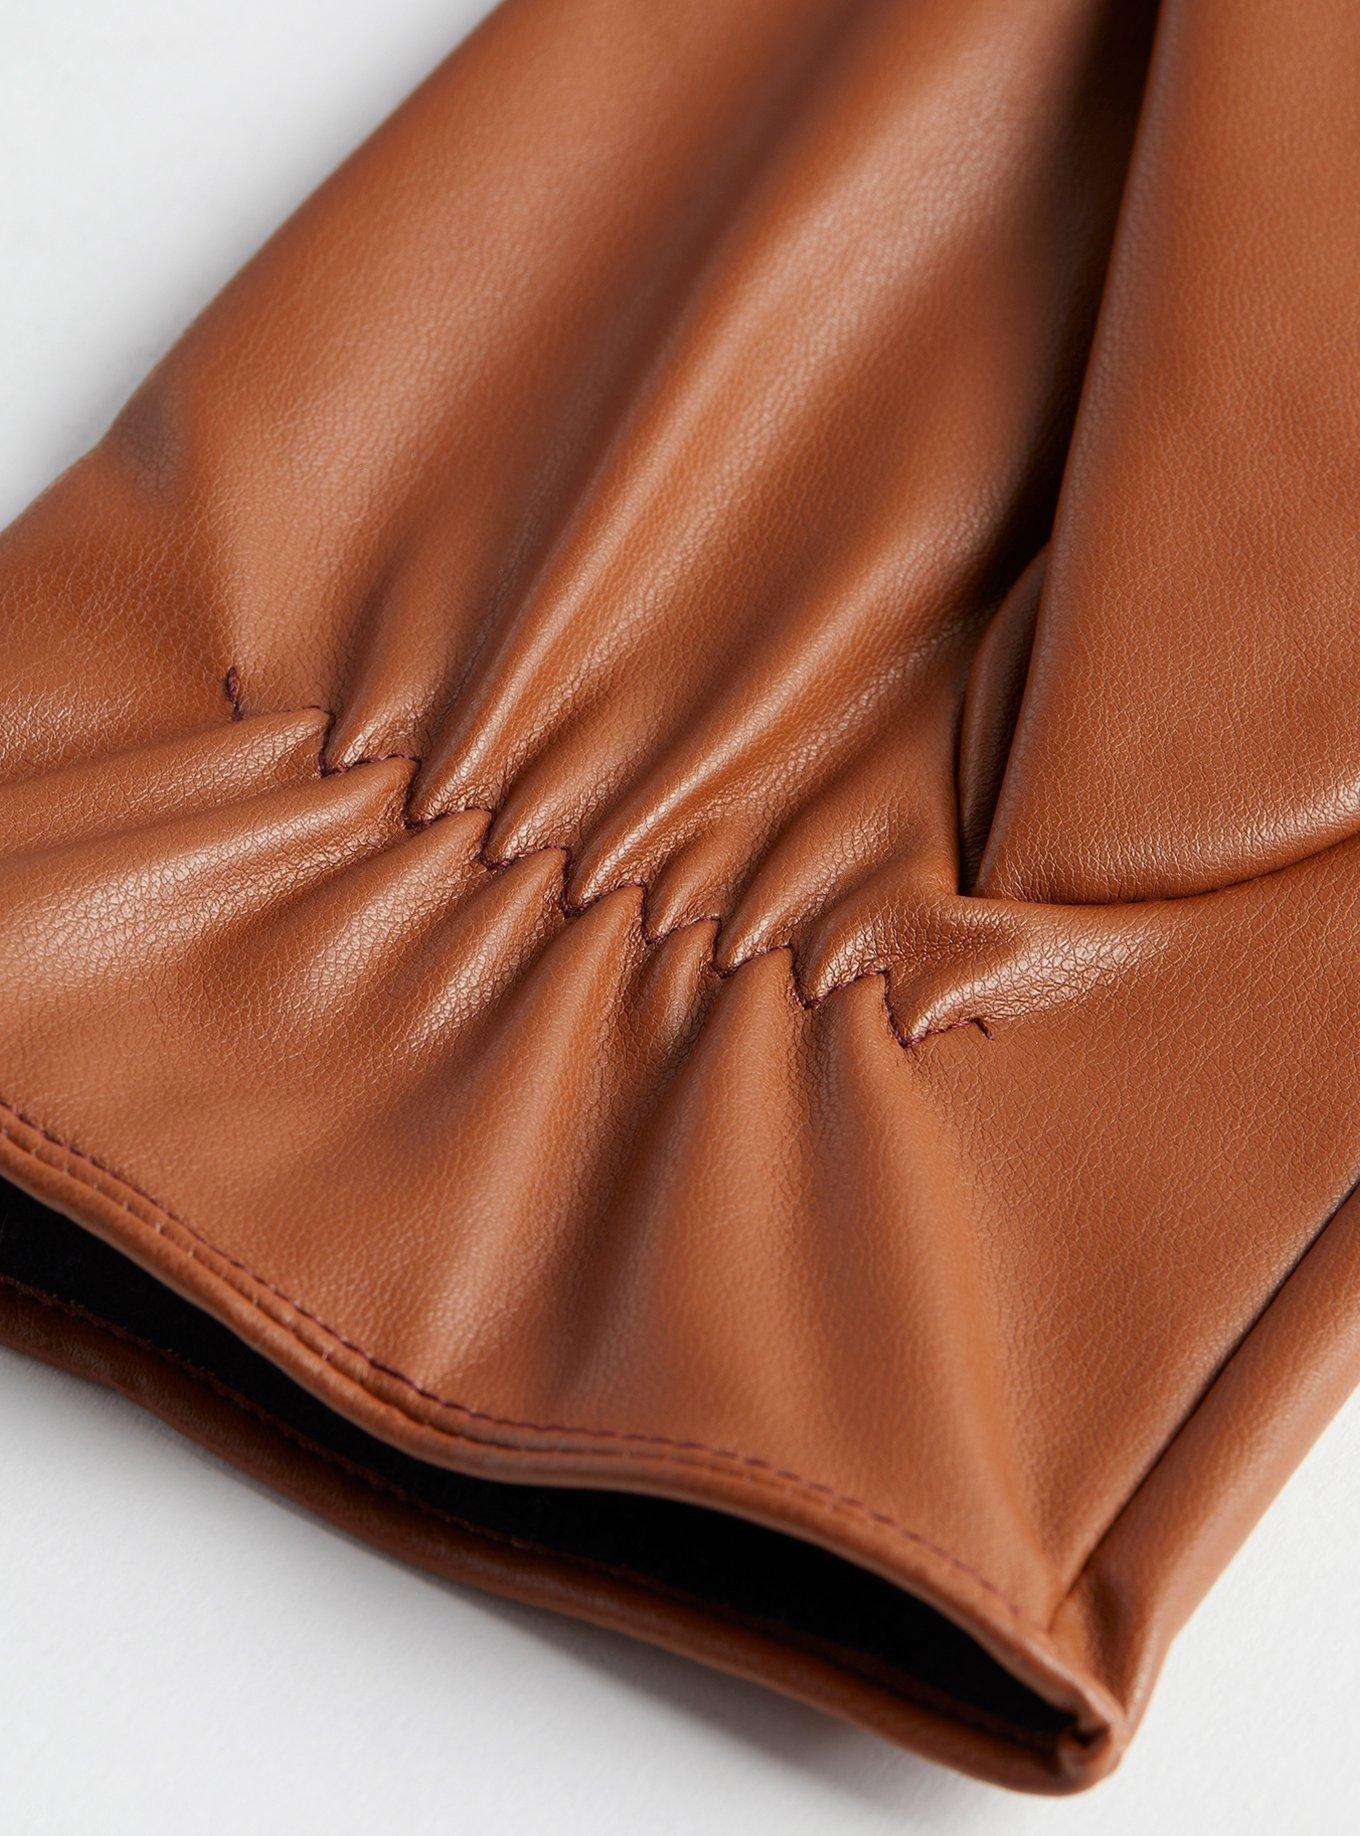 How to Clean Faux Leather